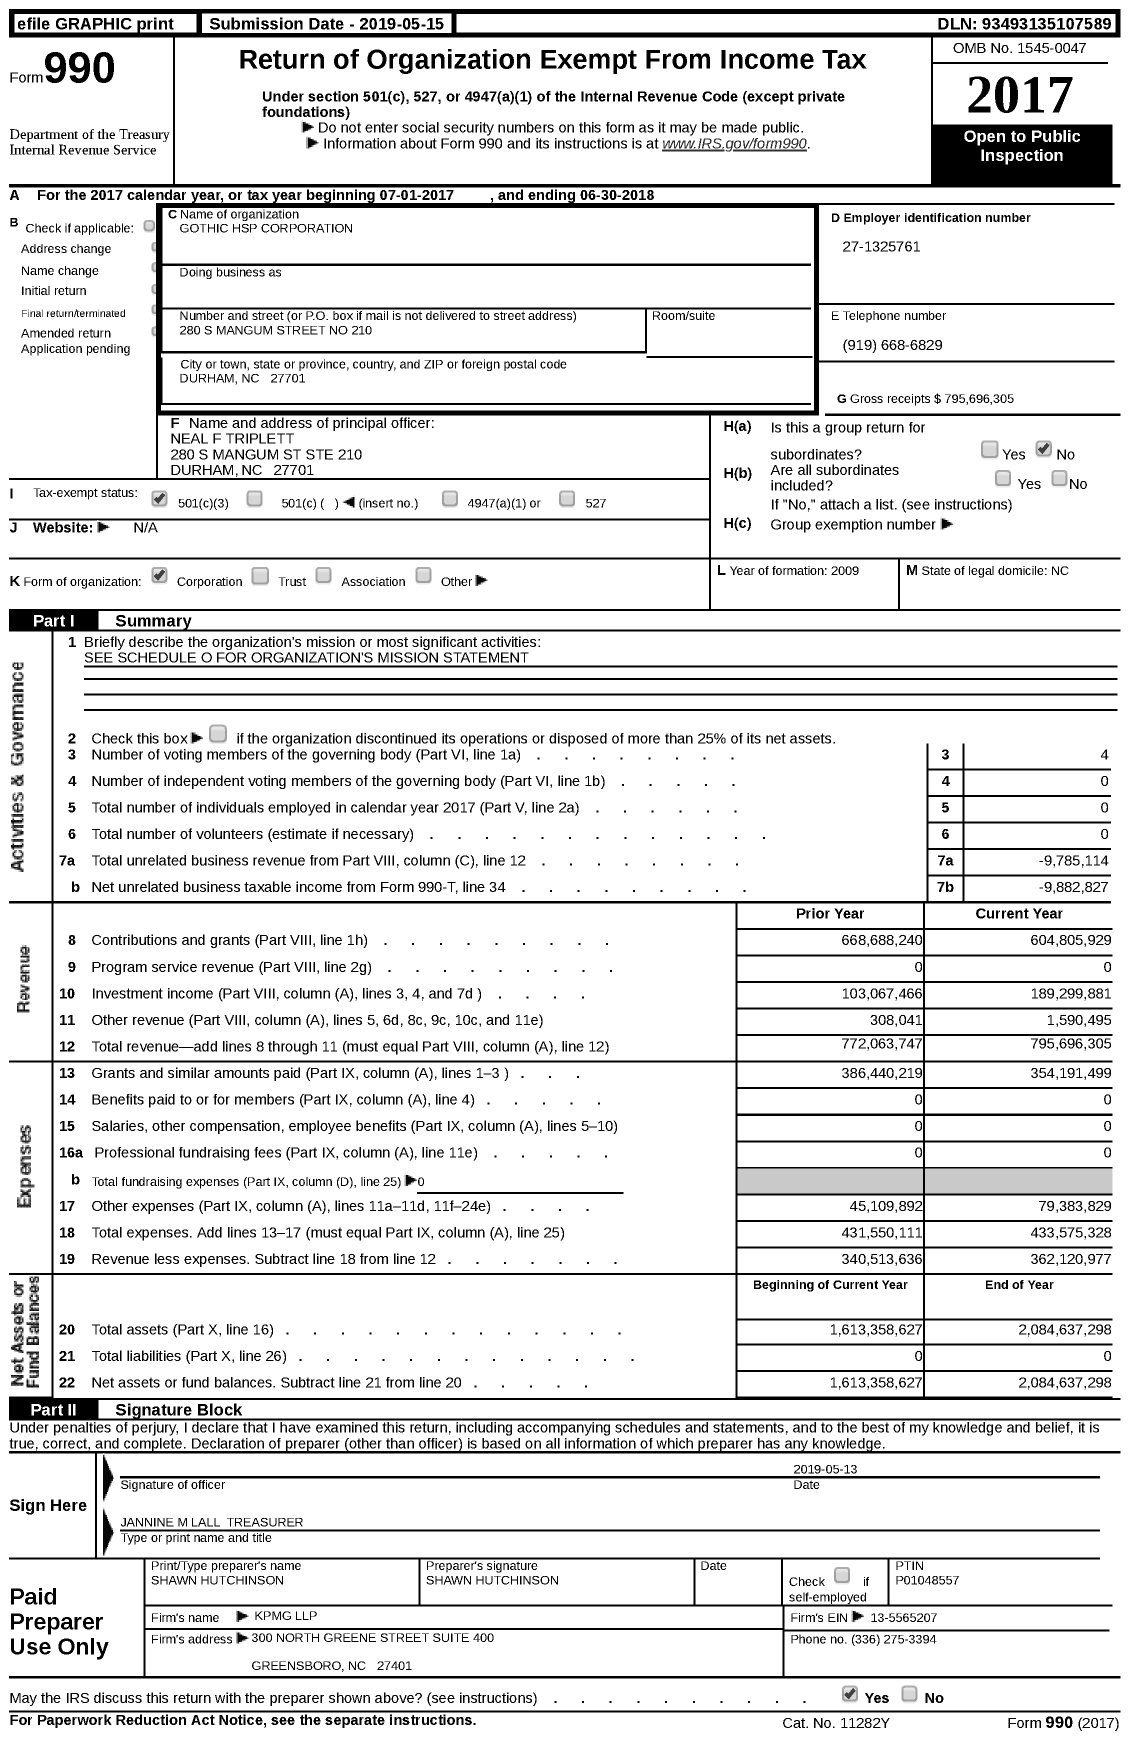 Image of first page of 2017 Form 990 for Gothic HSP Corporation